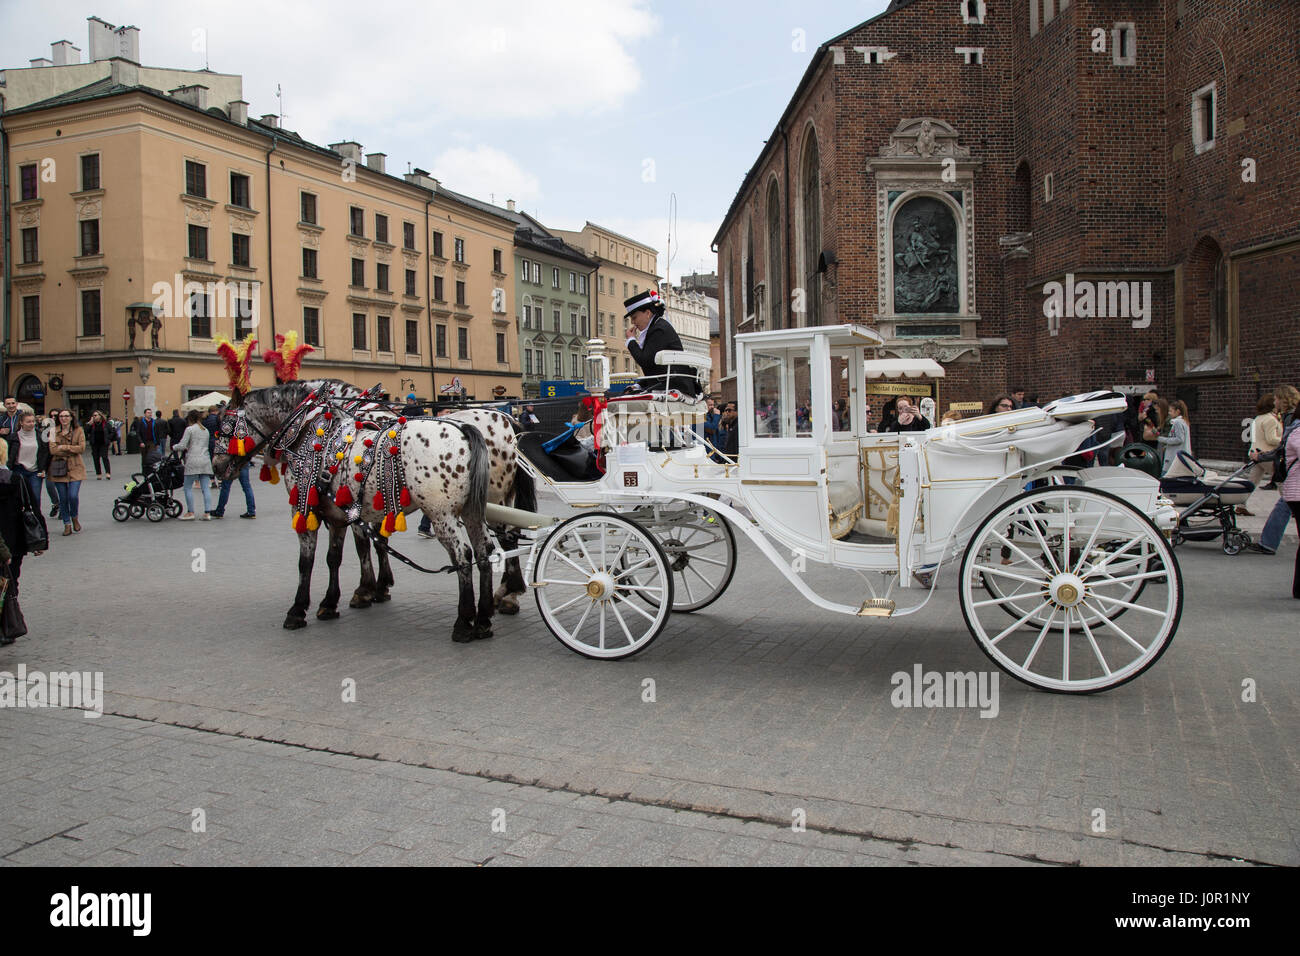 Horse and carriage tours in the main square in Krakow old town Stock Photo